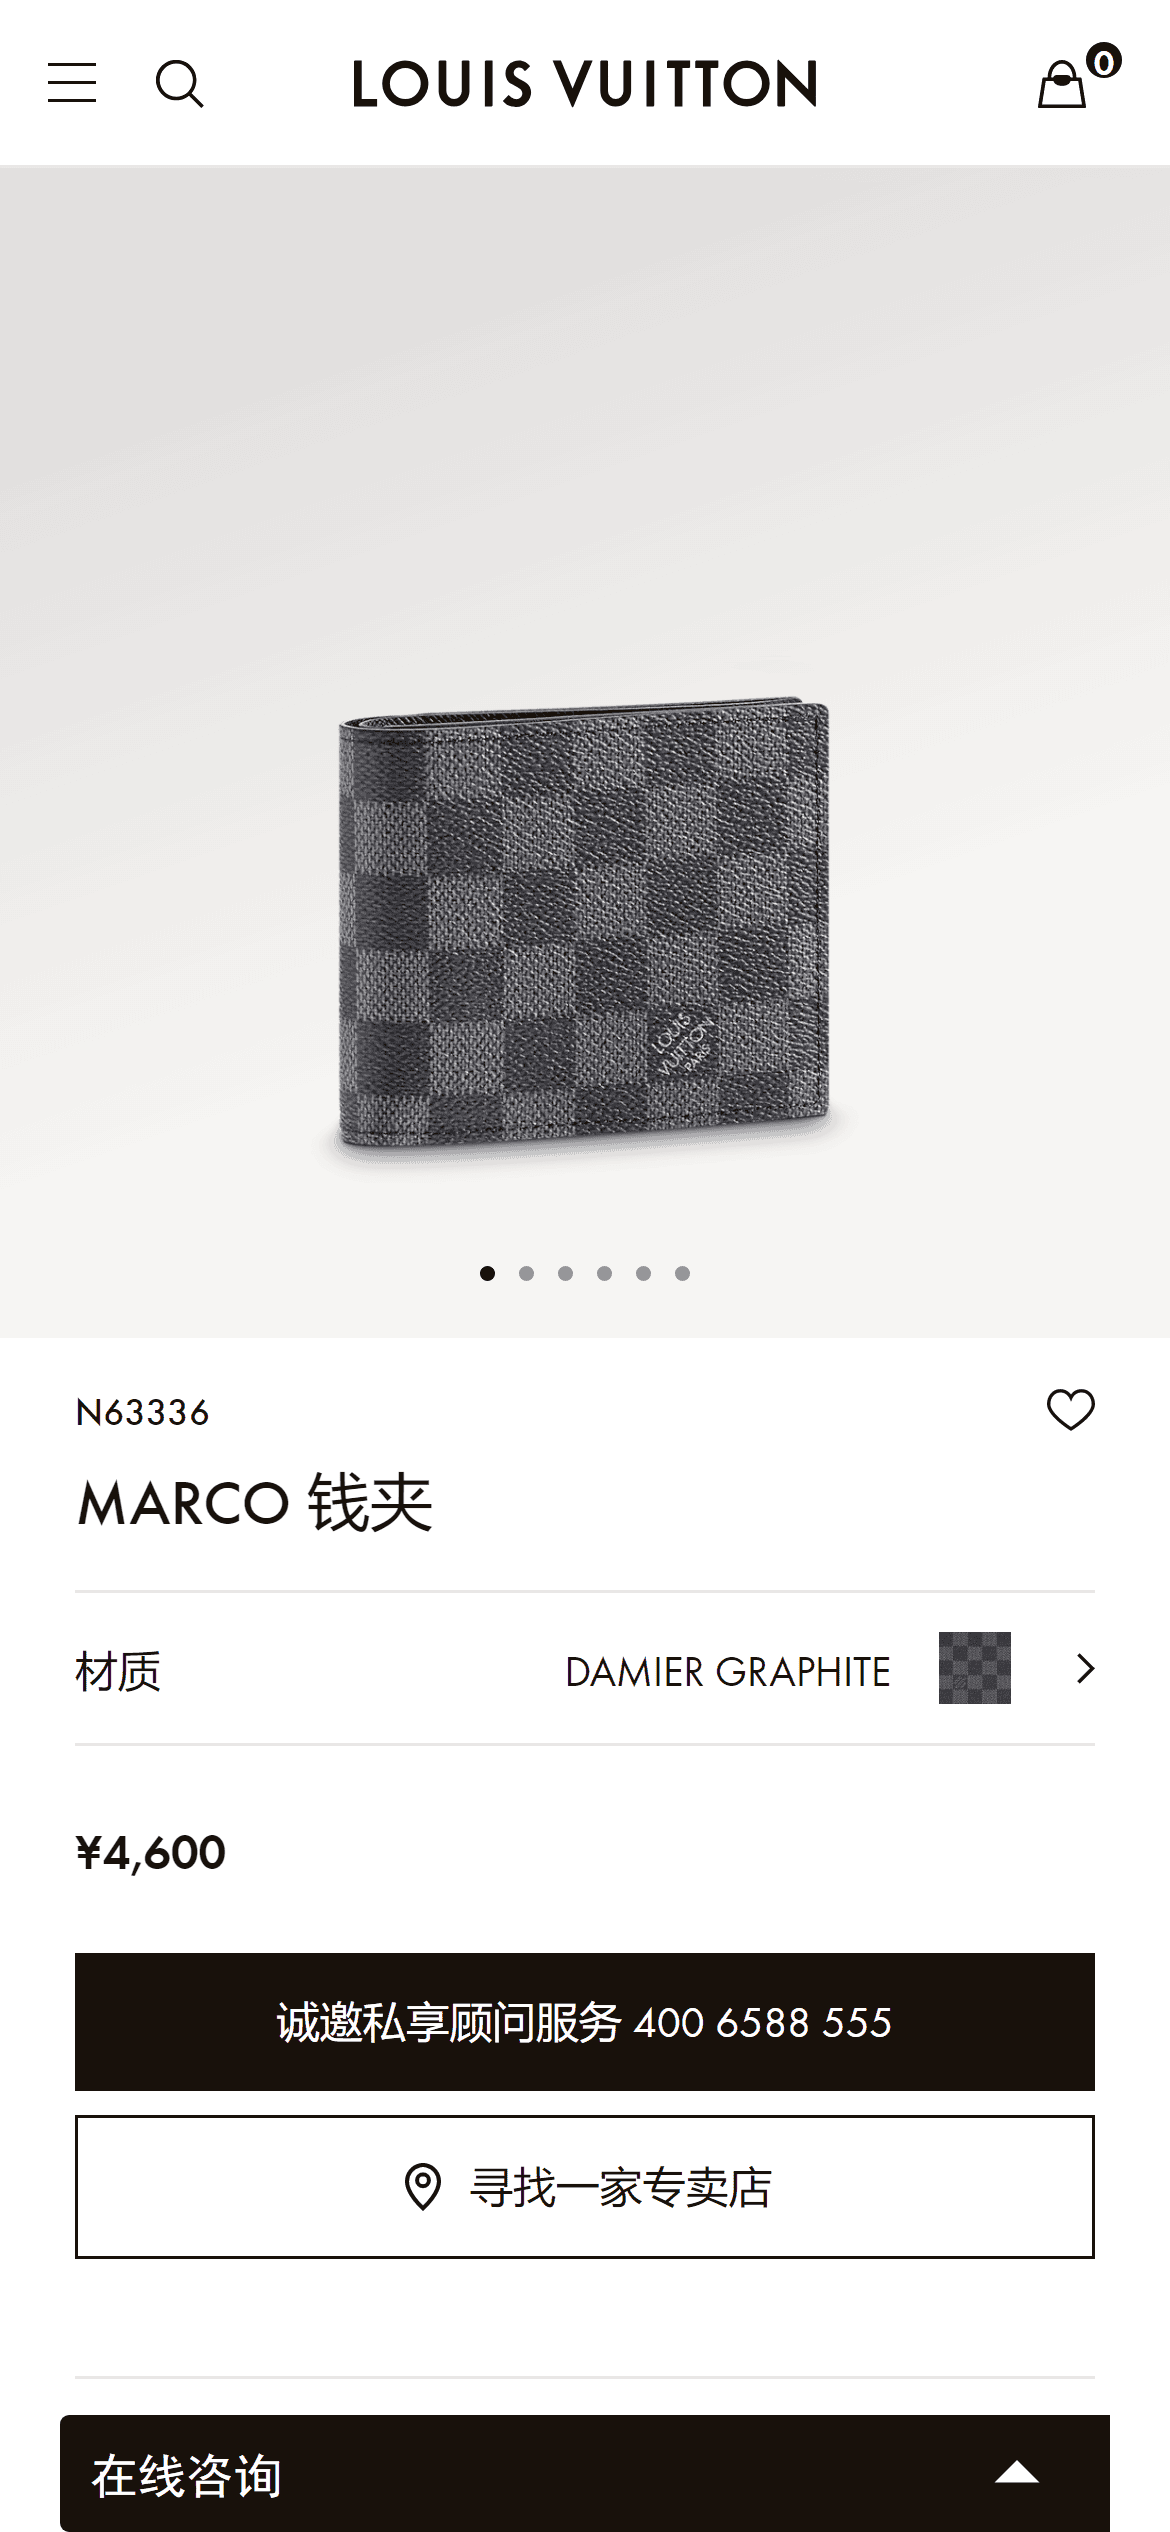 www.louisvuitton.cn_zhs-cn_products_marco-wallet-damier-graphite-nvprod530206v_N63336iPhone-12-Pro.png